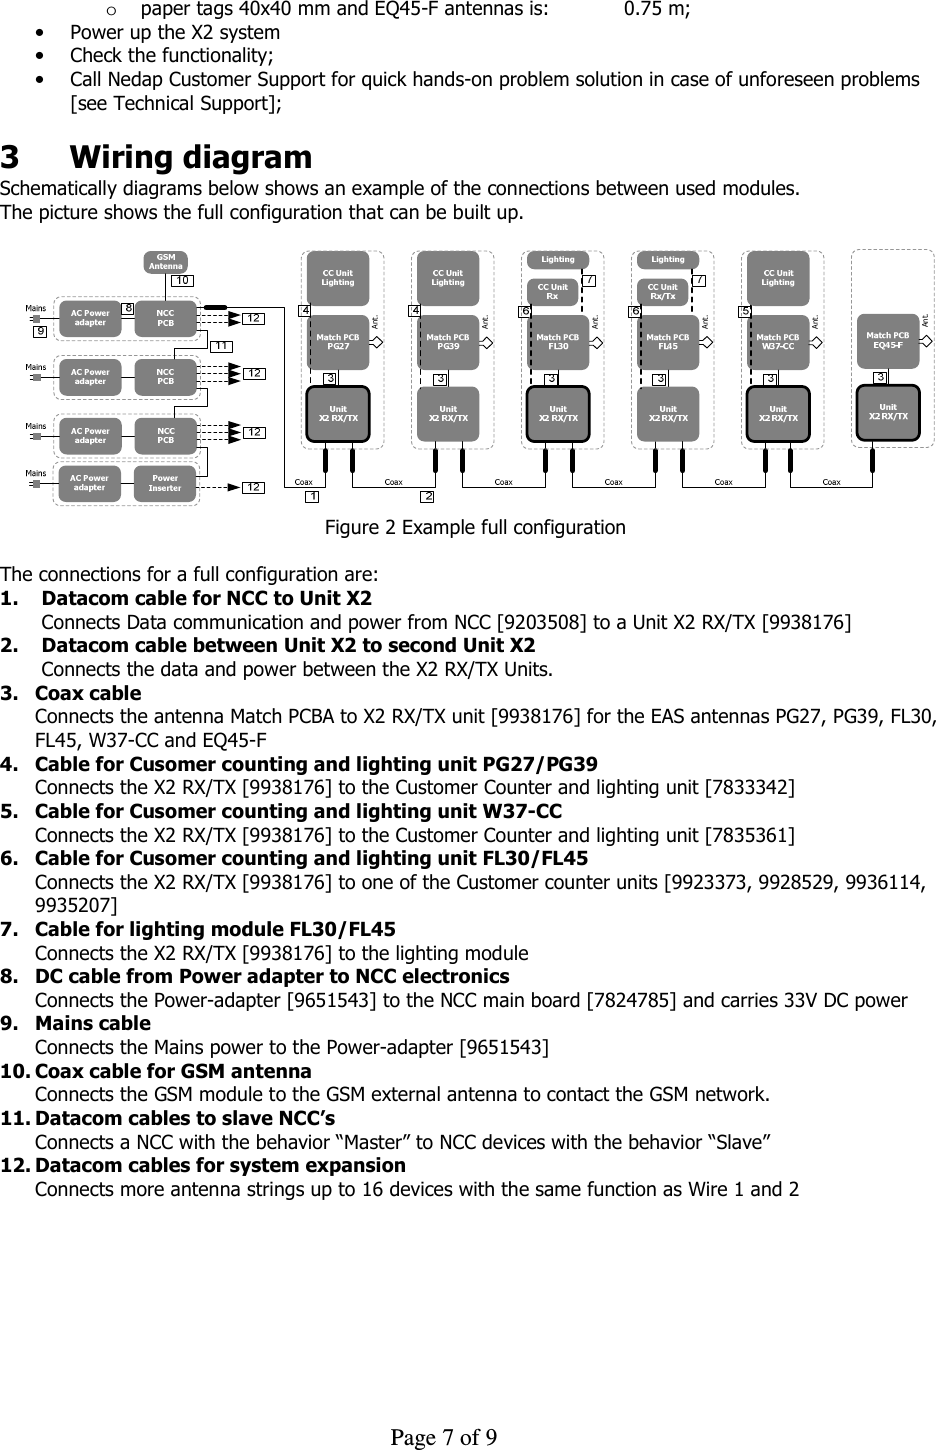     Page 7 of 9    o paper tags 40x40 mm and EQ45-F antennas is:   0.75 m;  • Power up the X2 system • Check the functionality; • Call Nedap Customer Support for quick hands-on problem solution in case of unforeseen problems [see Technical Support];  3  Wiring diagram Schematically diagrams below shows an example of the connections between used modules. The picture shows the full configuration that can be built up.   Ant.Ant.Ant.Ant.Ant.Ant. Figure 2 Example full configuration  The connections for a full configuration are: 1. Datacom cable for NCC to Unit X2  Connects Data communication and power from NCC [9203508] to a Unit X2 RX/TX [9938176] 2. Datacom cable between Unit X2 to second Unit X2 Connects the data and power between the X2 RX/TX Units. 3. Coax cable Connects the antenna Match PCBA to X2 RX/TX unit [9938176] for the EAS antennas PG27, PG39, FL30, FL45, W37-CC and EQ45-F 4. Cable for Cusomer counting and lighting unit PG27/PG39 Connects the X2 RX/TX [9938176] to the Customer Counter and lighting unit [7833342]  5. Cable for Cusomer counting and lighting unit W37-CC Connects the X2 RX/TX [9938176] to the Customer Counter and lighting unit [7835361]  6. Cable for Cusomer counting and lighting unit FL30/FL45 Connects the X2 RX/TX [9938176] to one of the Customer counter units [9923373, 9928529, 9936114, 9935207] 7. Cable for lighting module FL30/FL45 Connects the X2 RX/TX [9938176] to the lighting module  8. DC cable from Power adapter to NCC electronics Connects the Power-adapter [9651543] to the NCC main board [7824785] and carries 33V DC power 9. Mains cable  Connects the Mains power to the Power-adapter [9651543] 10. Coax cable for GSM antenna Connects the GSM module to the GSM external antenna to contact the GSM network.  11. Datacom cables to slave NCC’s Connects a NCC with the behavior “Master” to NCC devices with the behavior “Slave” 12. Datacom cables for system expansion Connects more antenna strings up to 16 devices with the same function as Wire 1 and 2  